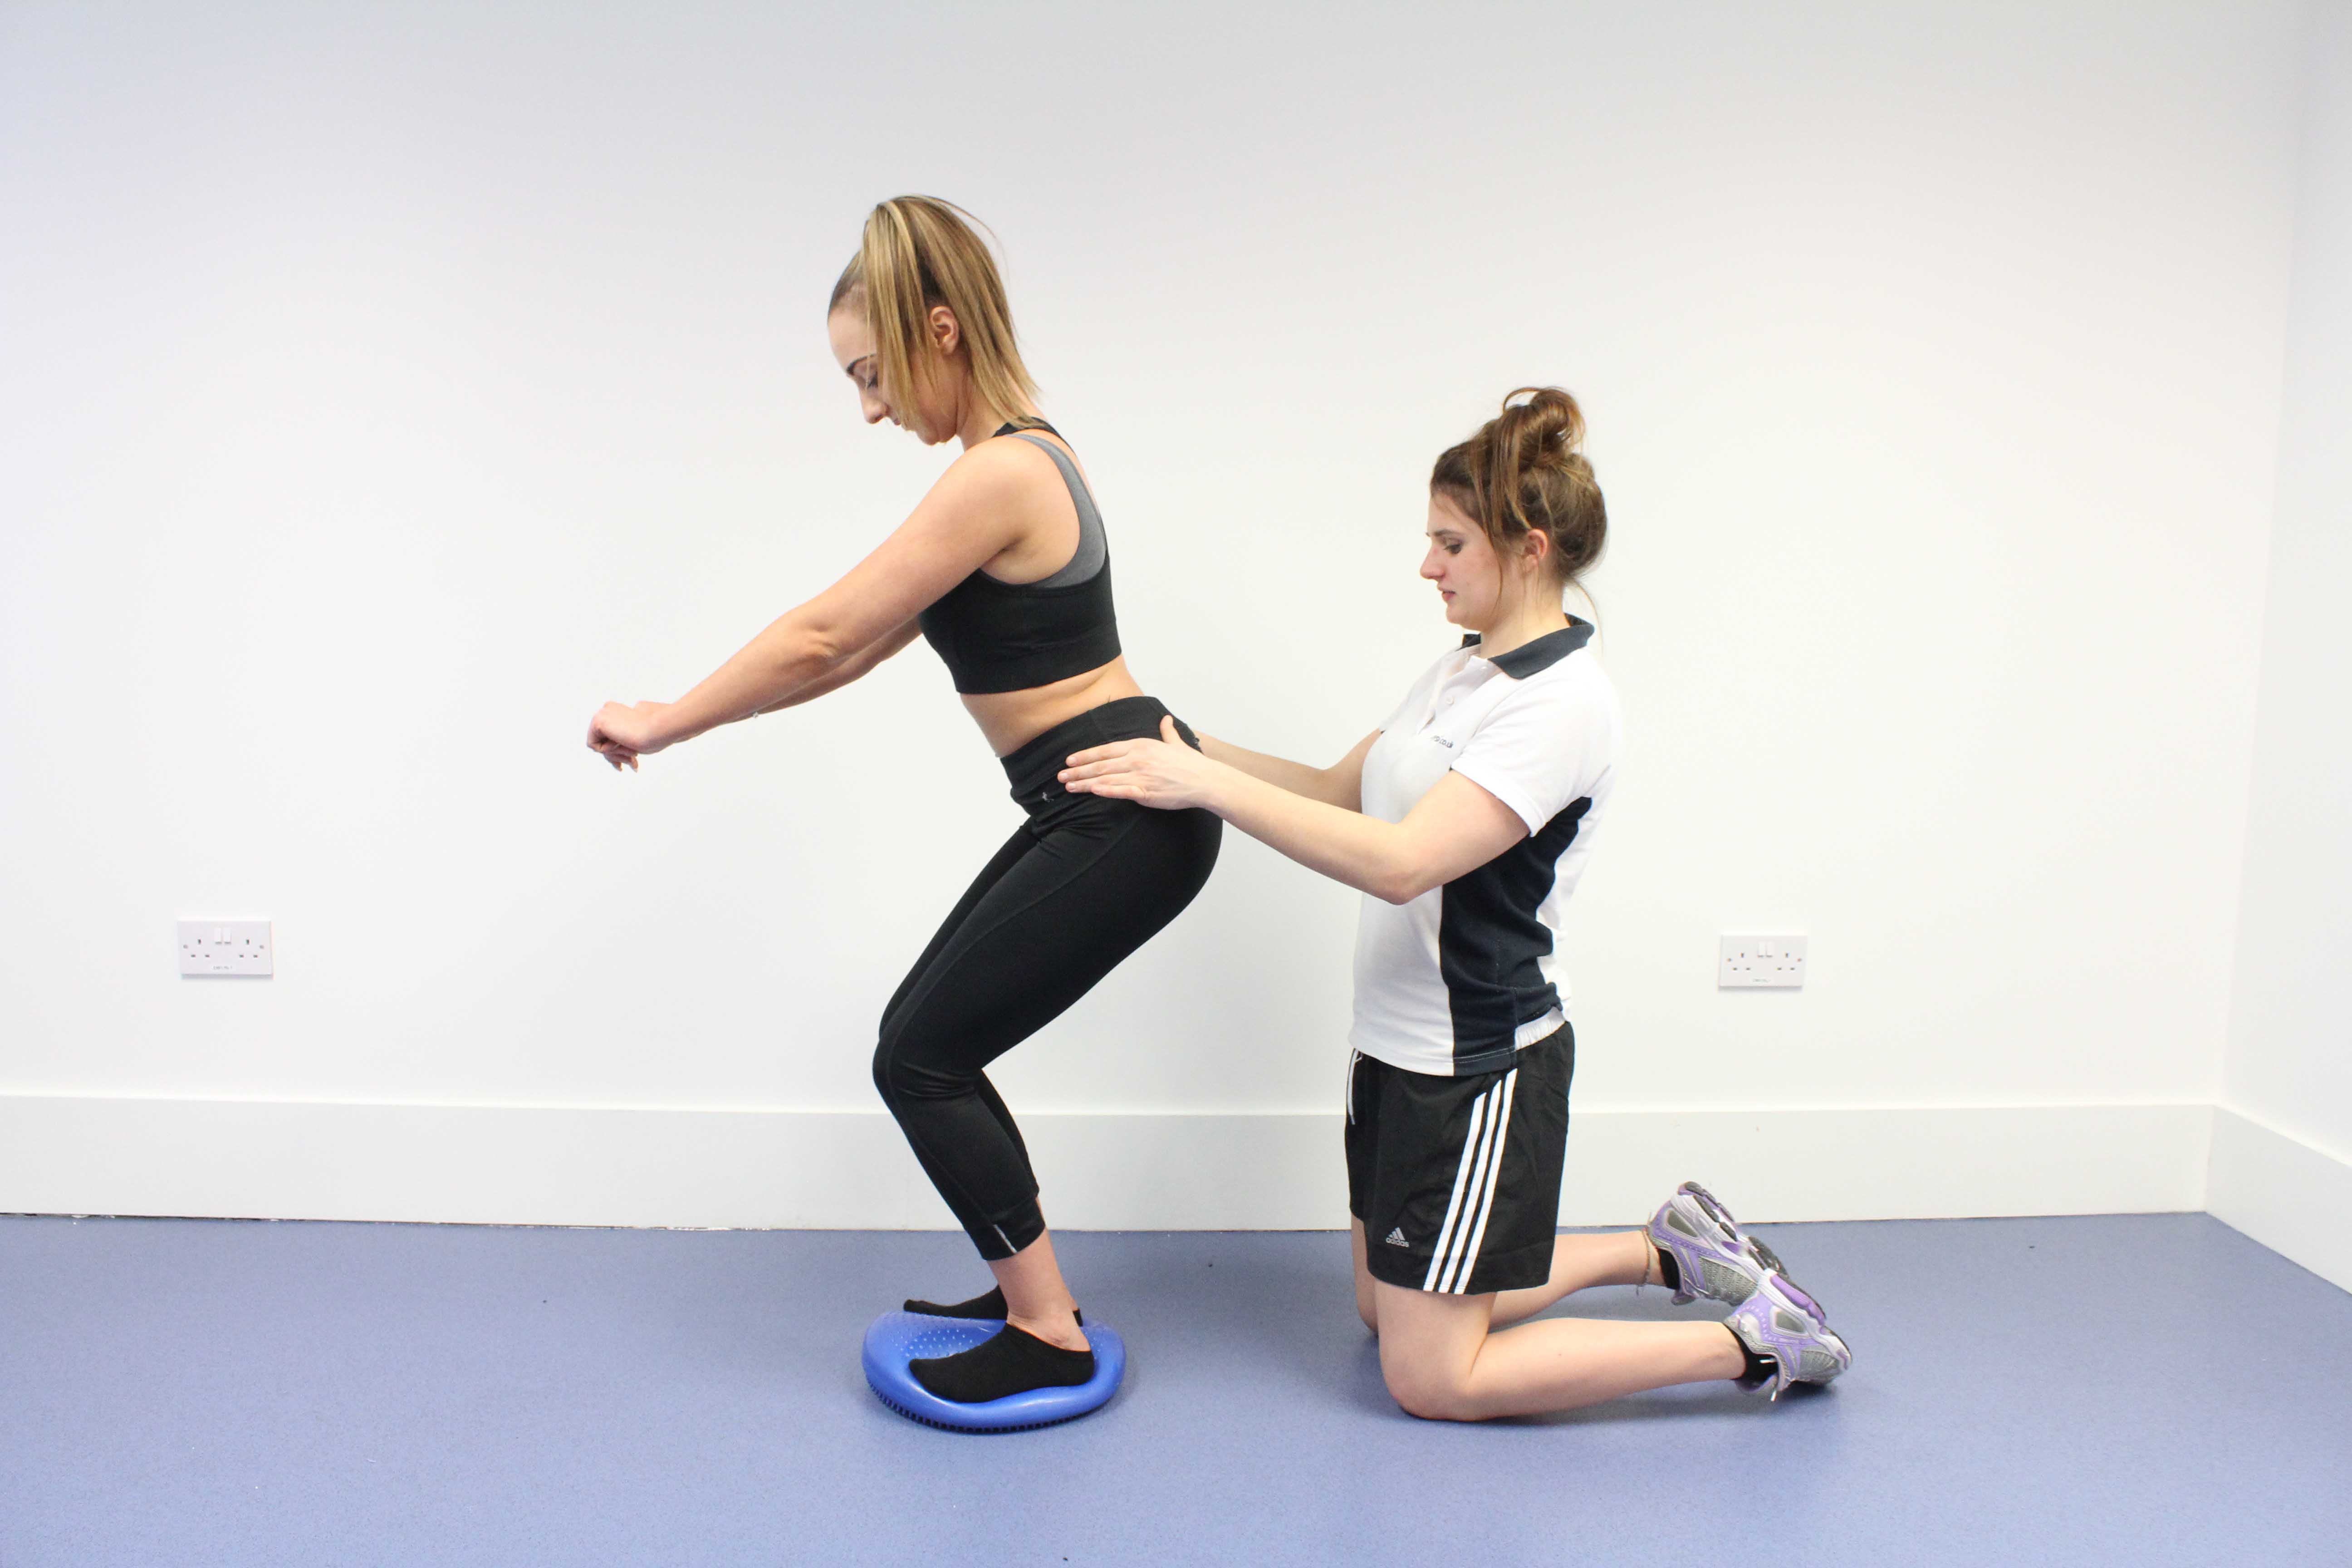 Stability training for the foot and ankle supervised by an experienced physiotherapist